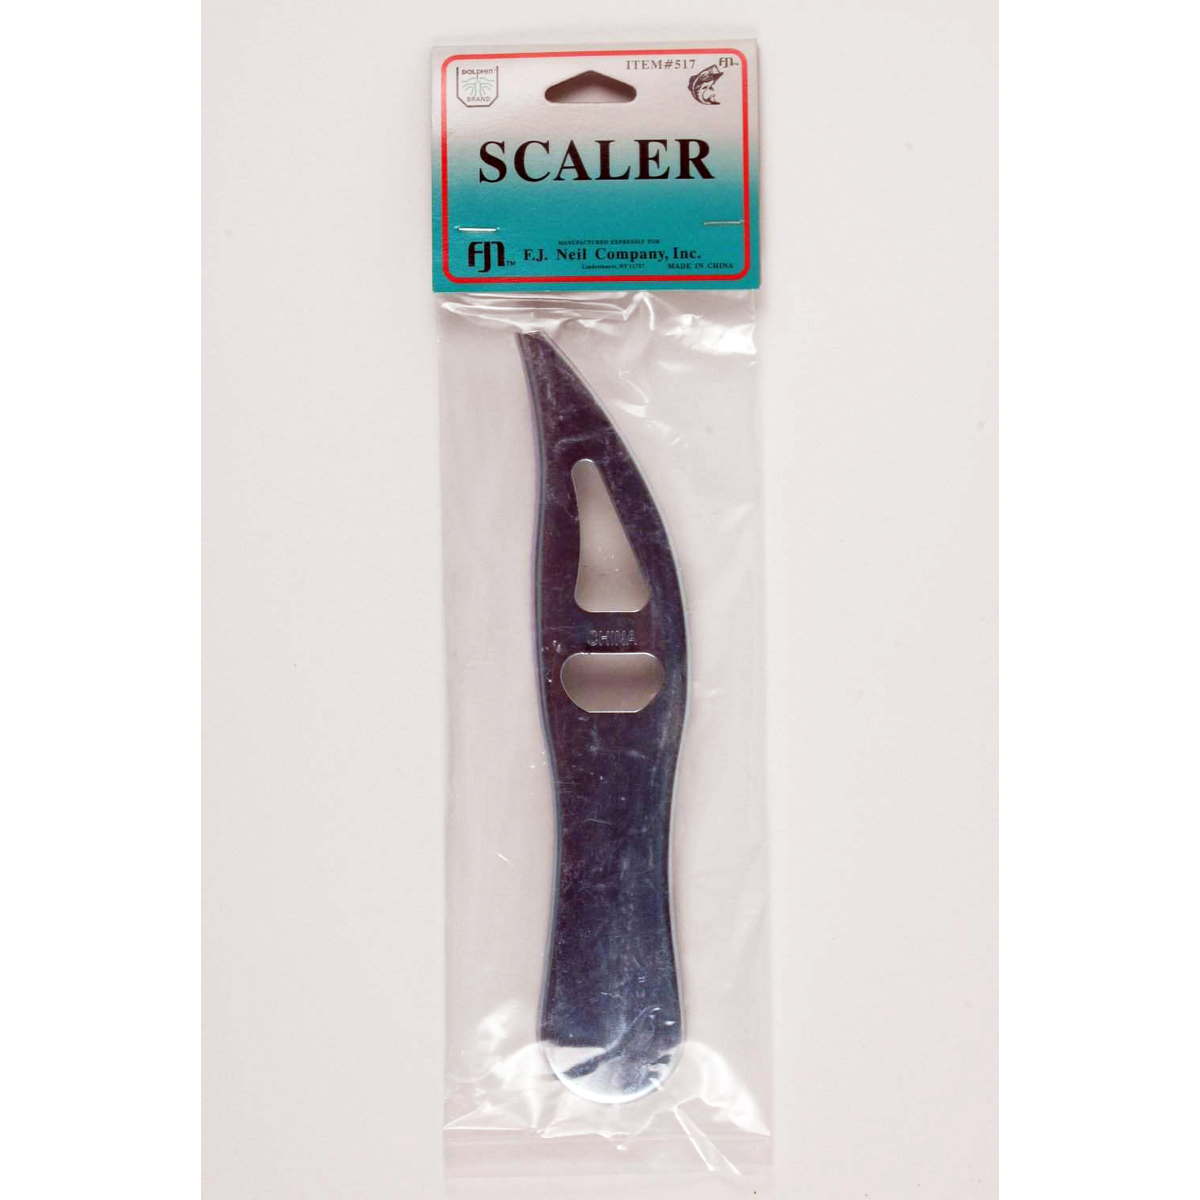 Photo of F.J. Neil Metal Hand Scaler for sale at United Tackle Shops.